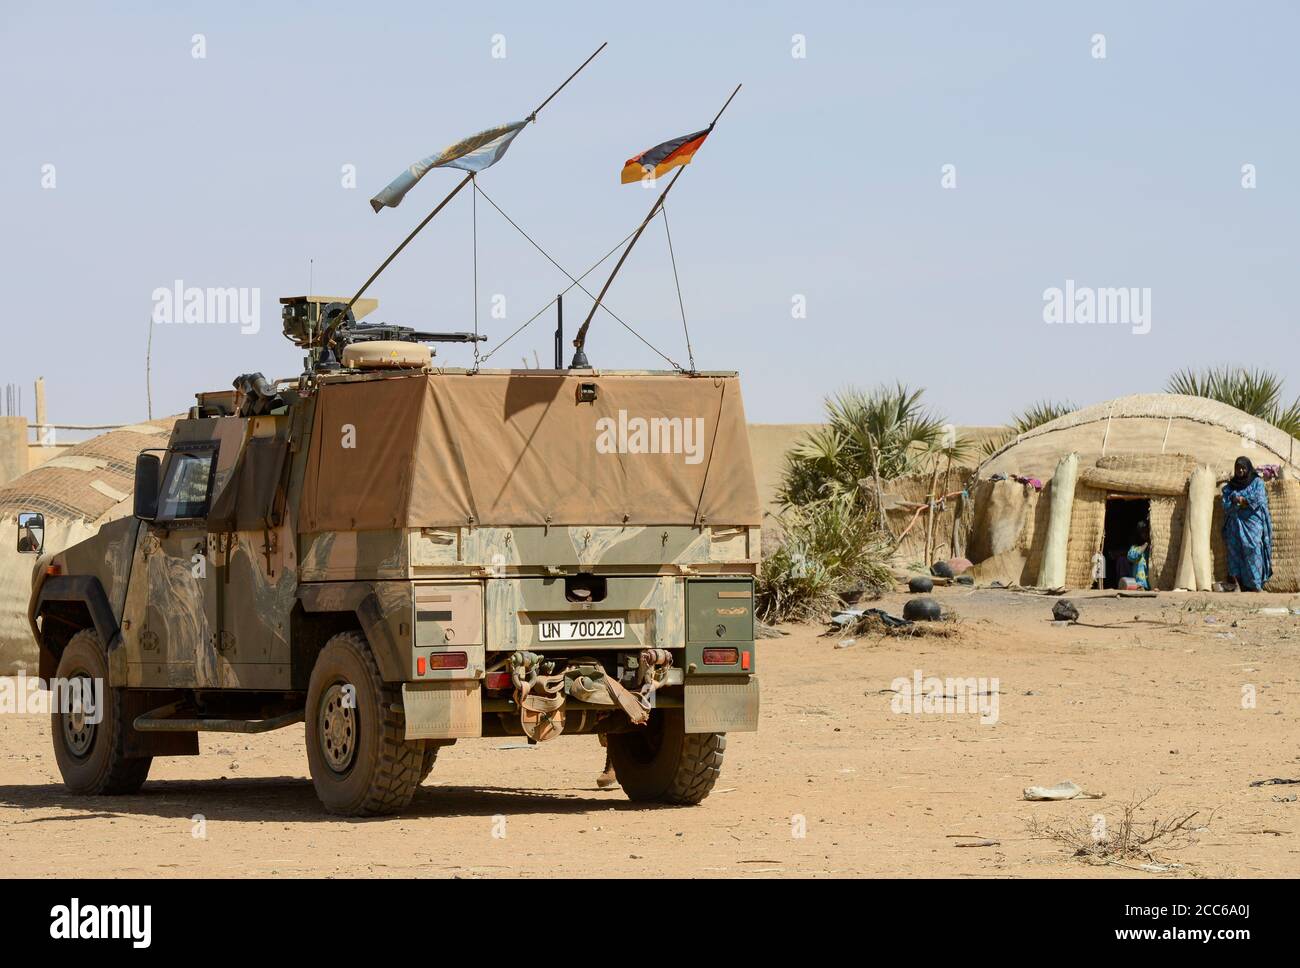 MALI, Gao, Minusma UN peace keeping mission, Camp Castor, german army Bundeswehr, patrol with Eagle Mowag armored vehicle in village BAGOUNDJÉ Stock Photo